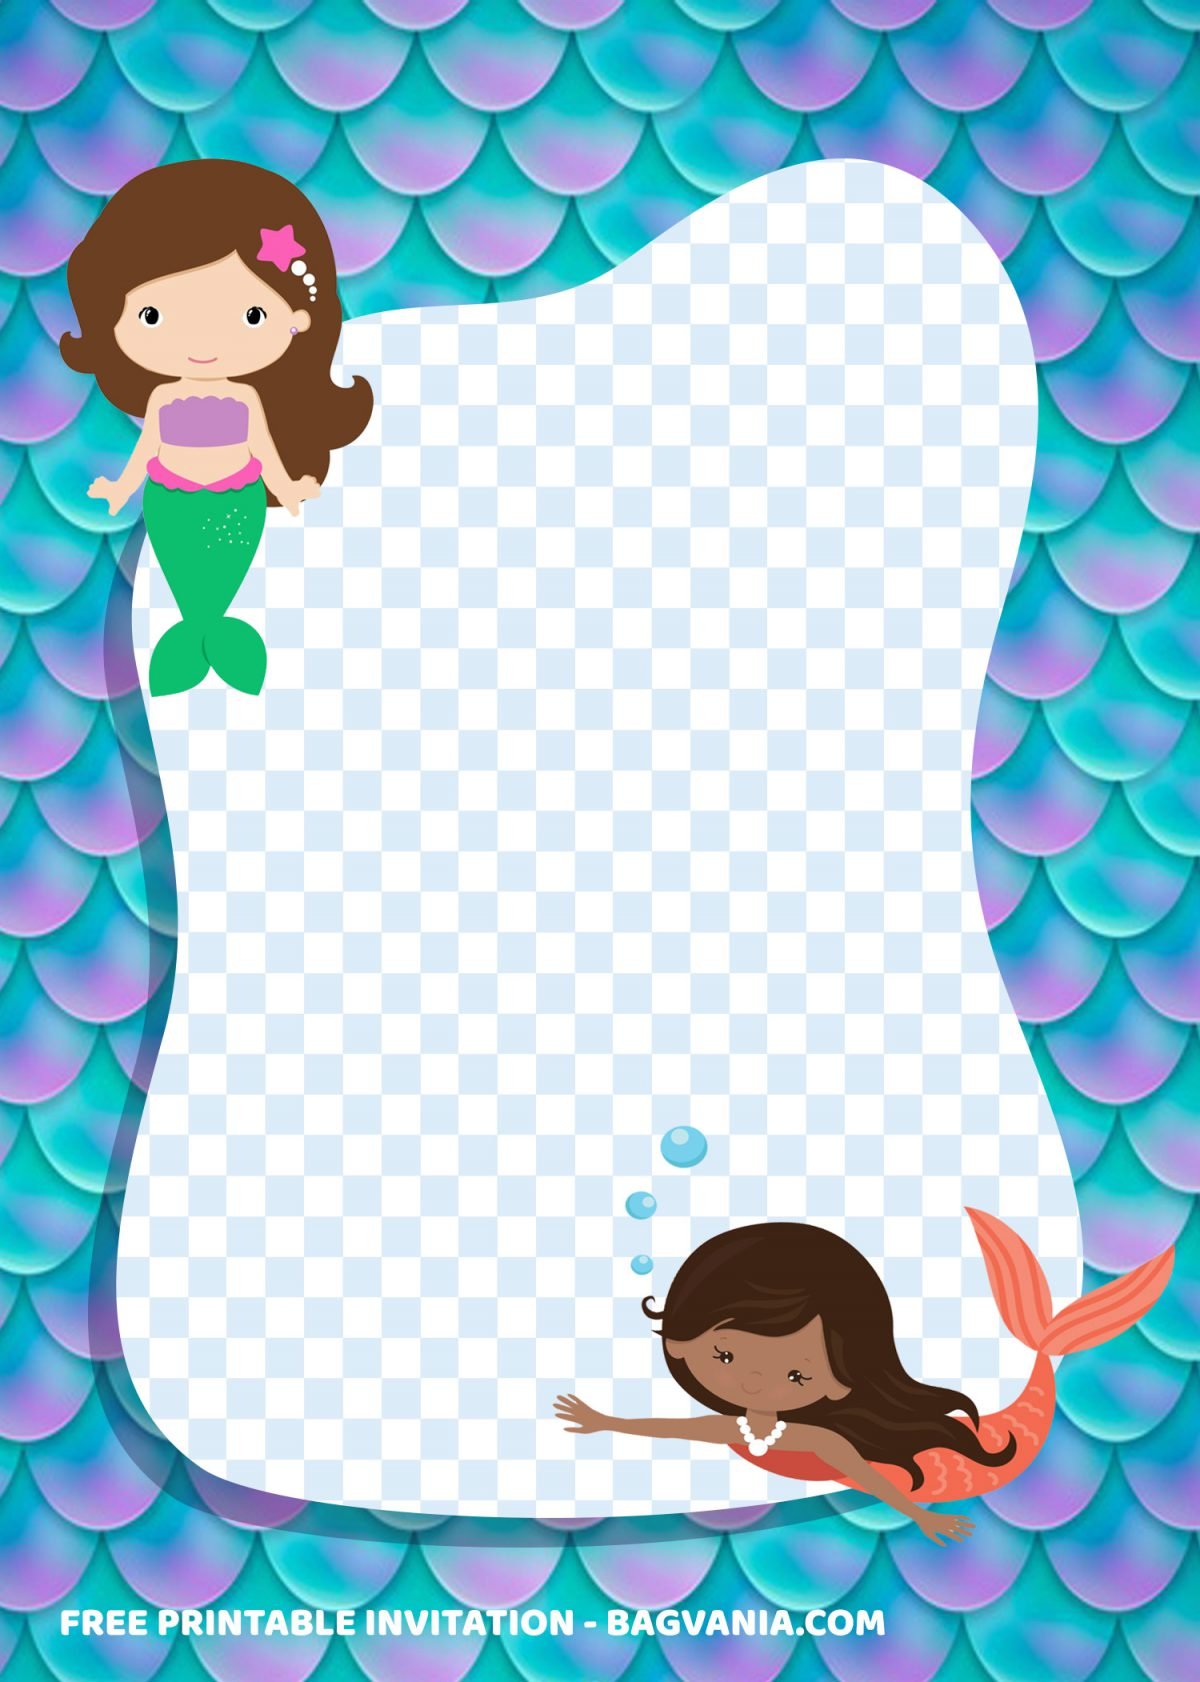 Free Printable Mermaid Birthday Invitation Templates With Two Mermaid Swimming and Portrait design